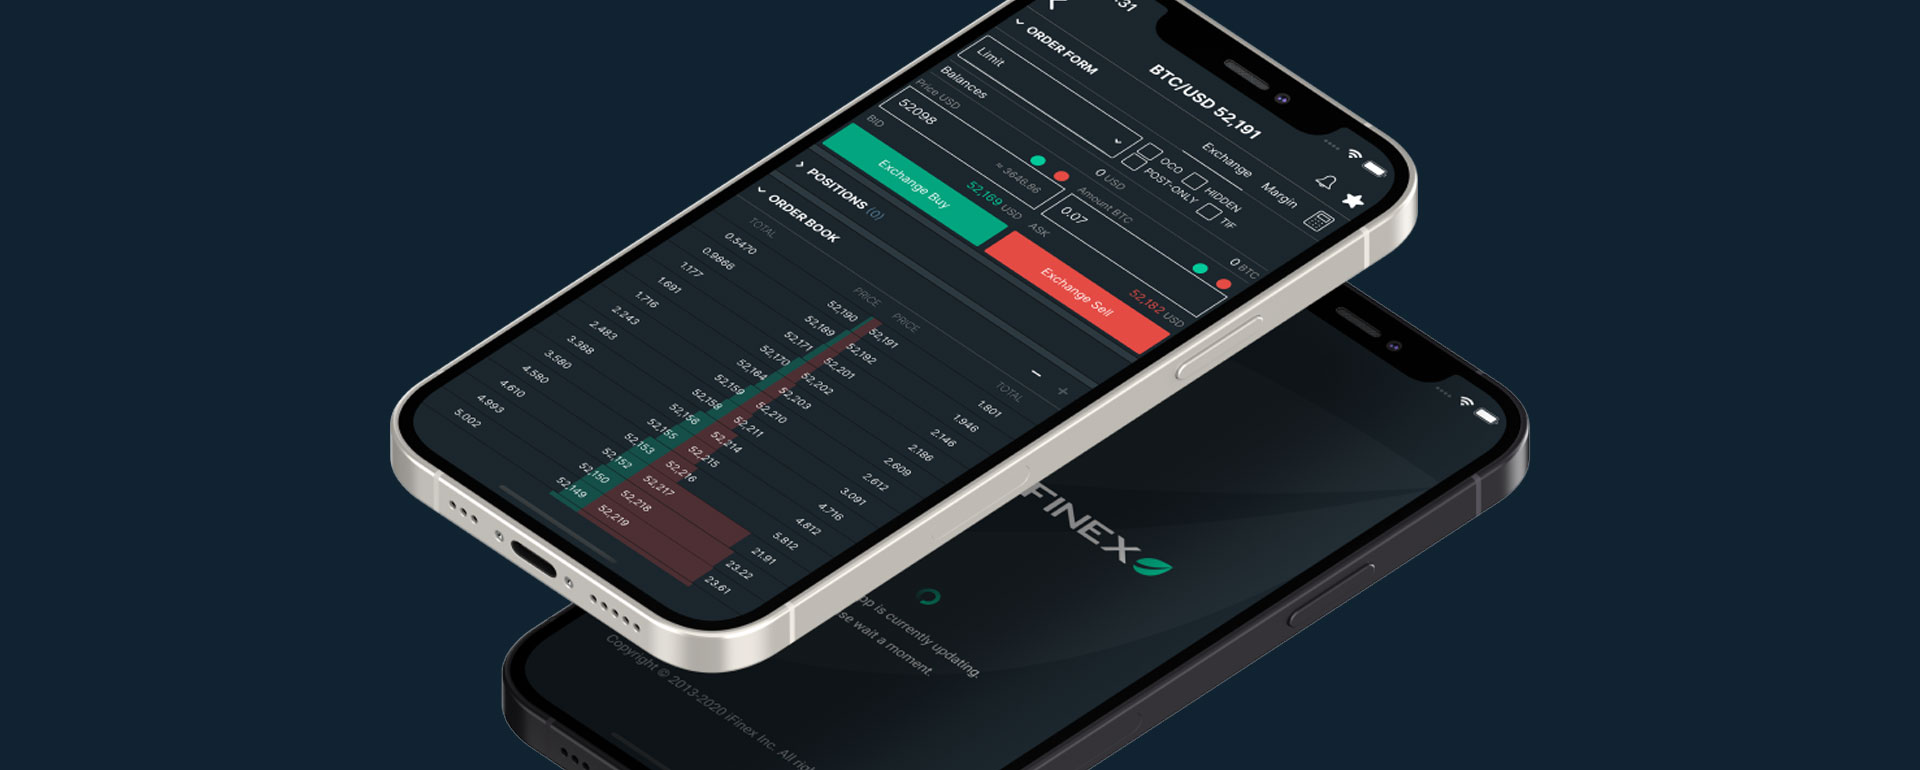 Bitfinex Monitors Risk While Giving its Customers the Ultimate Trading Experience